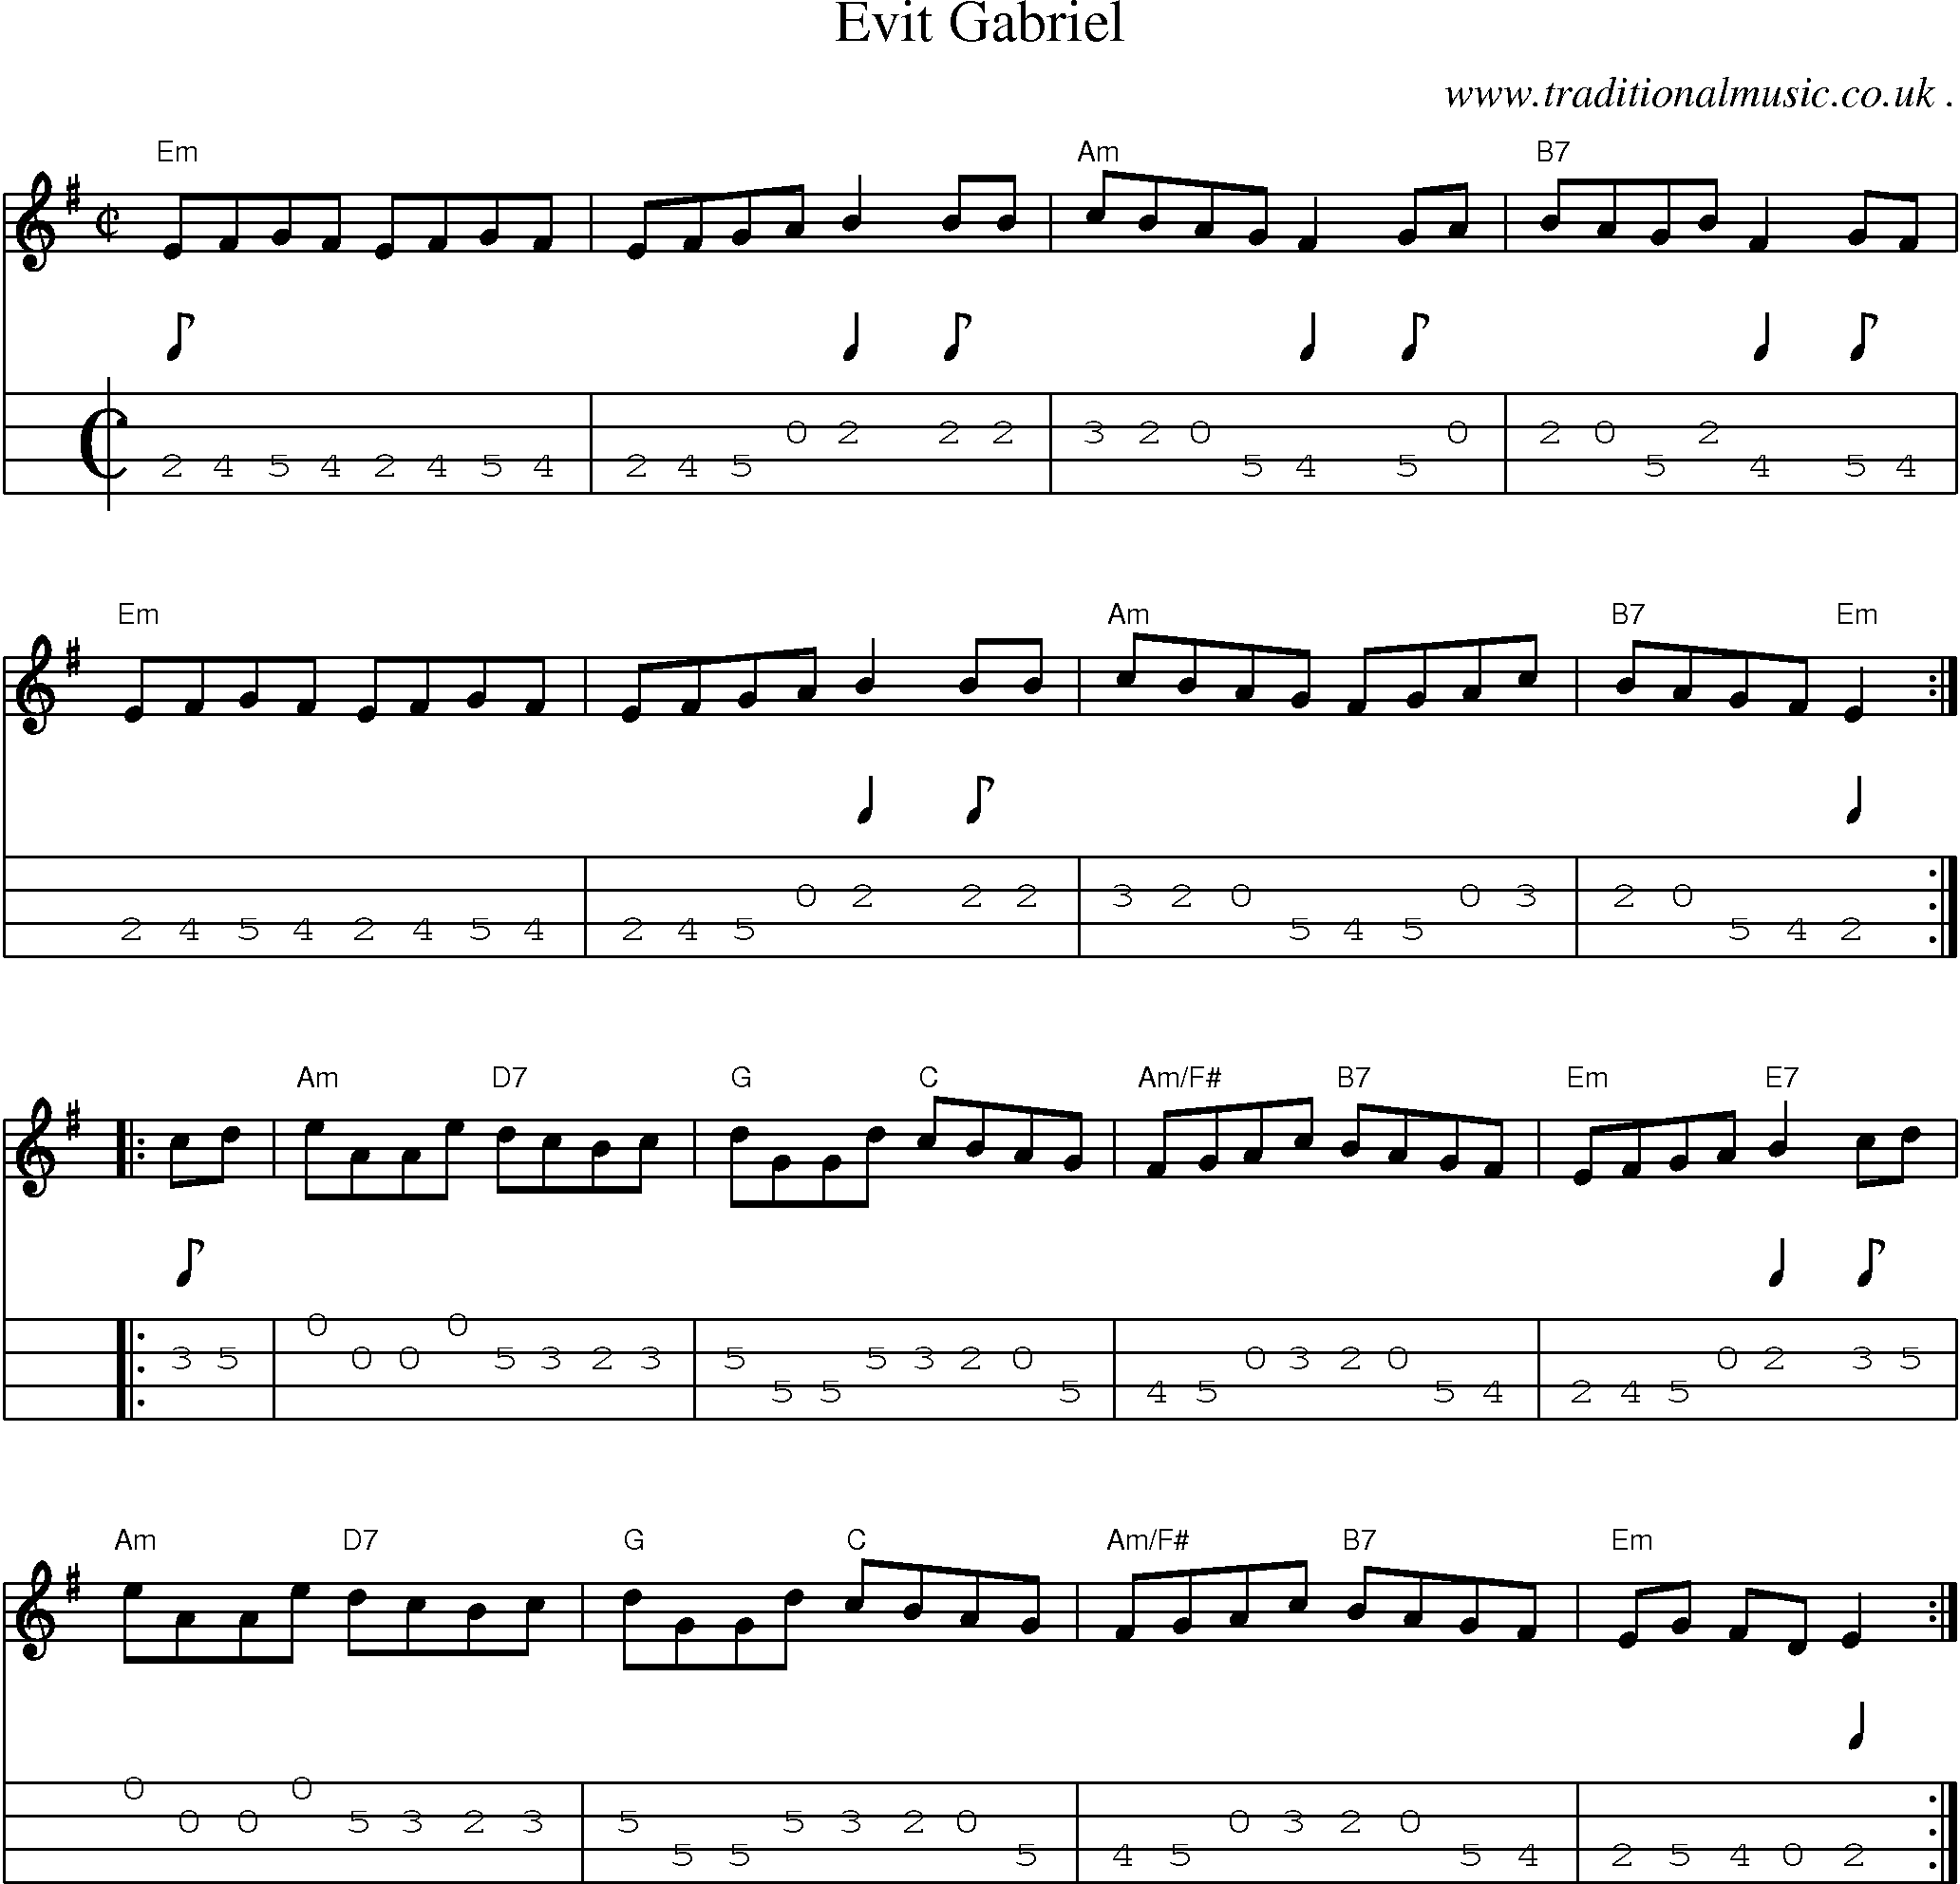 Music Score and Guitar Tabs for Evit Gabriel